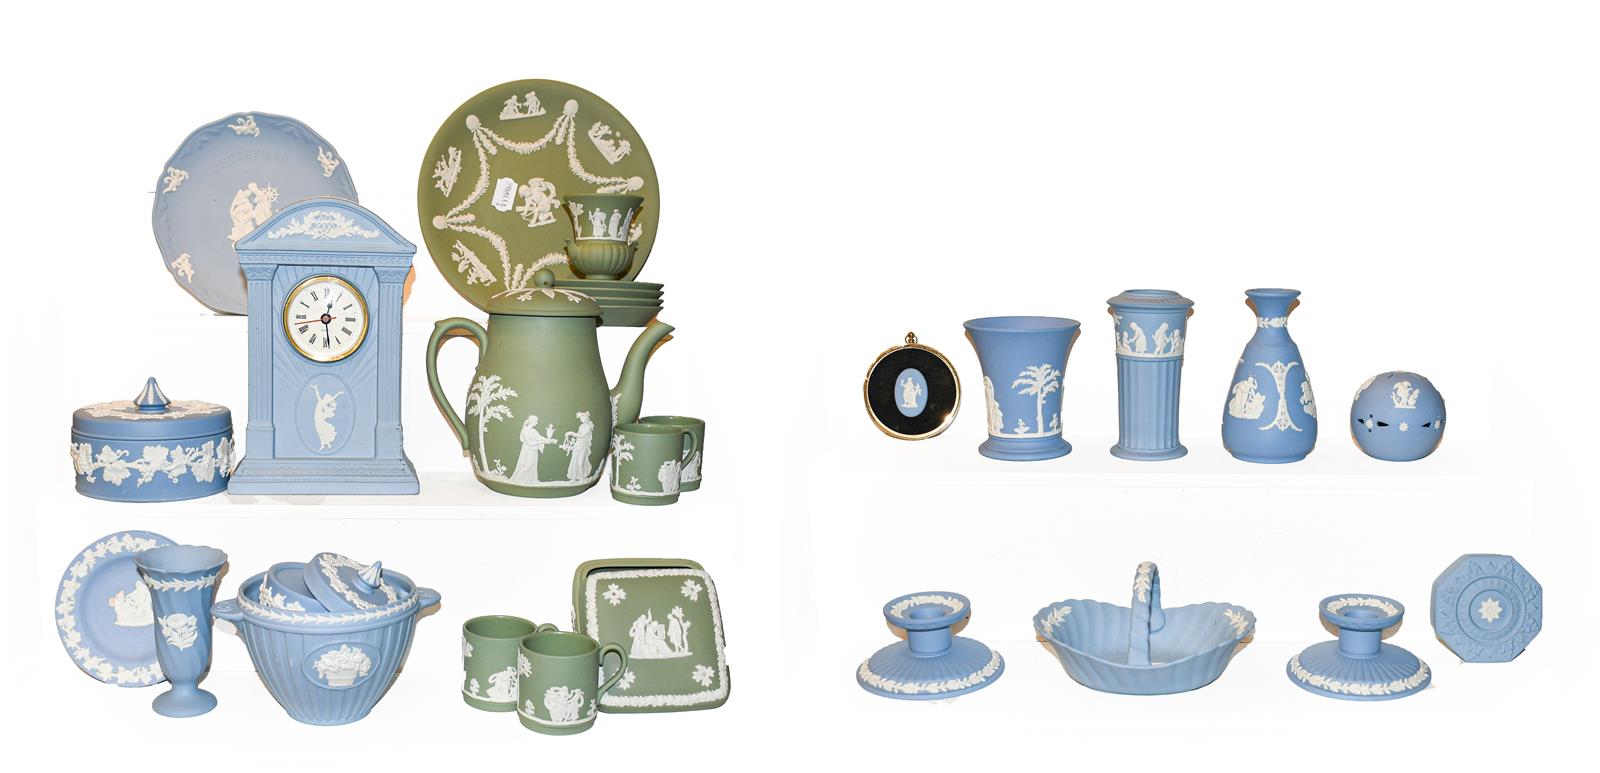 A quantity of Wedgwood Jasperware in blue and green, including a mantel clock, vases and trinket